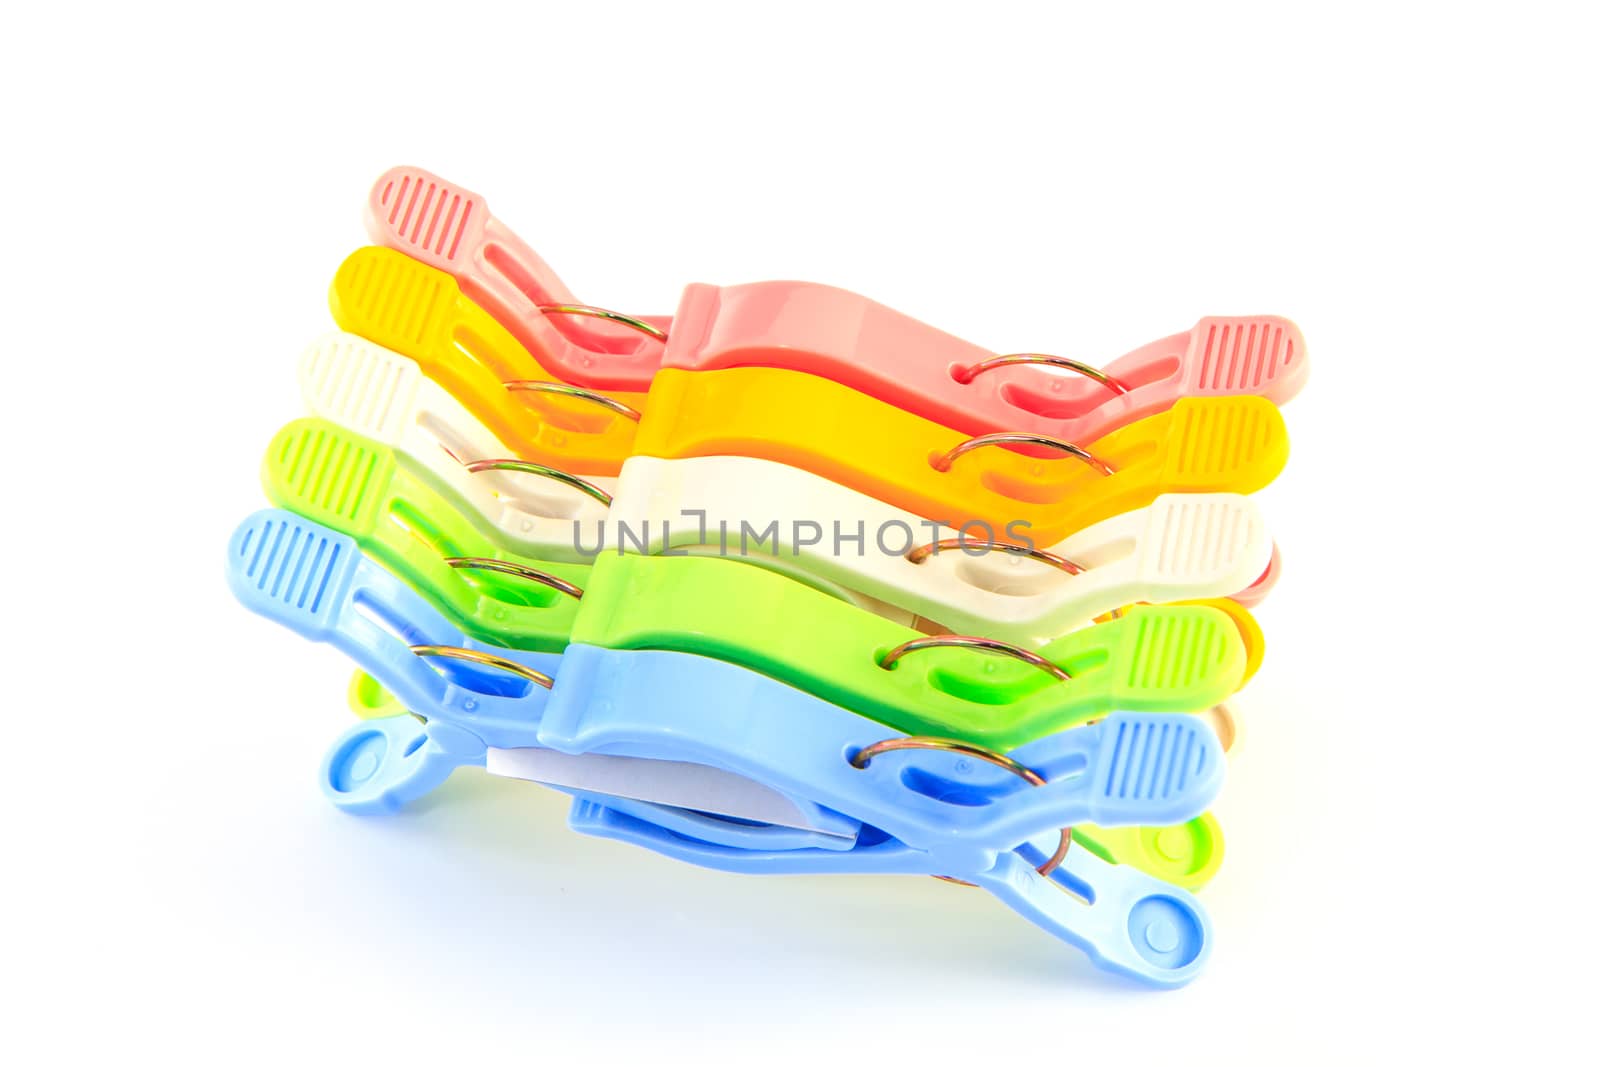 Colorful Clothes clips on white back ground